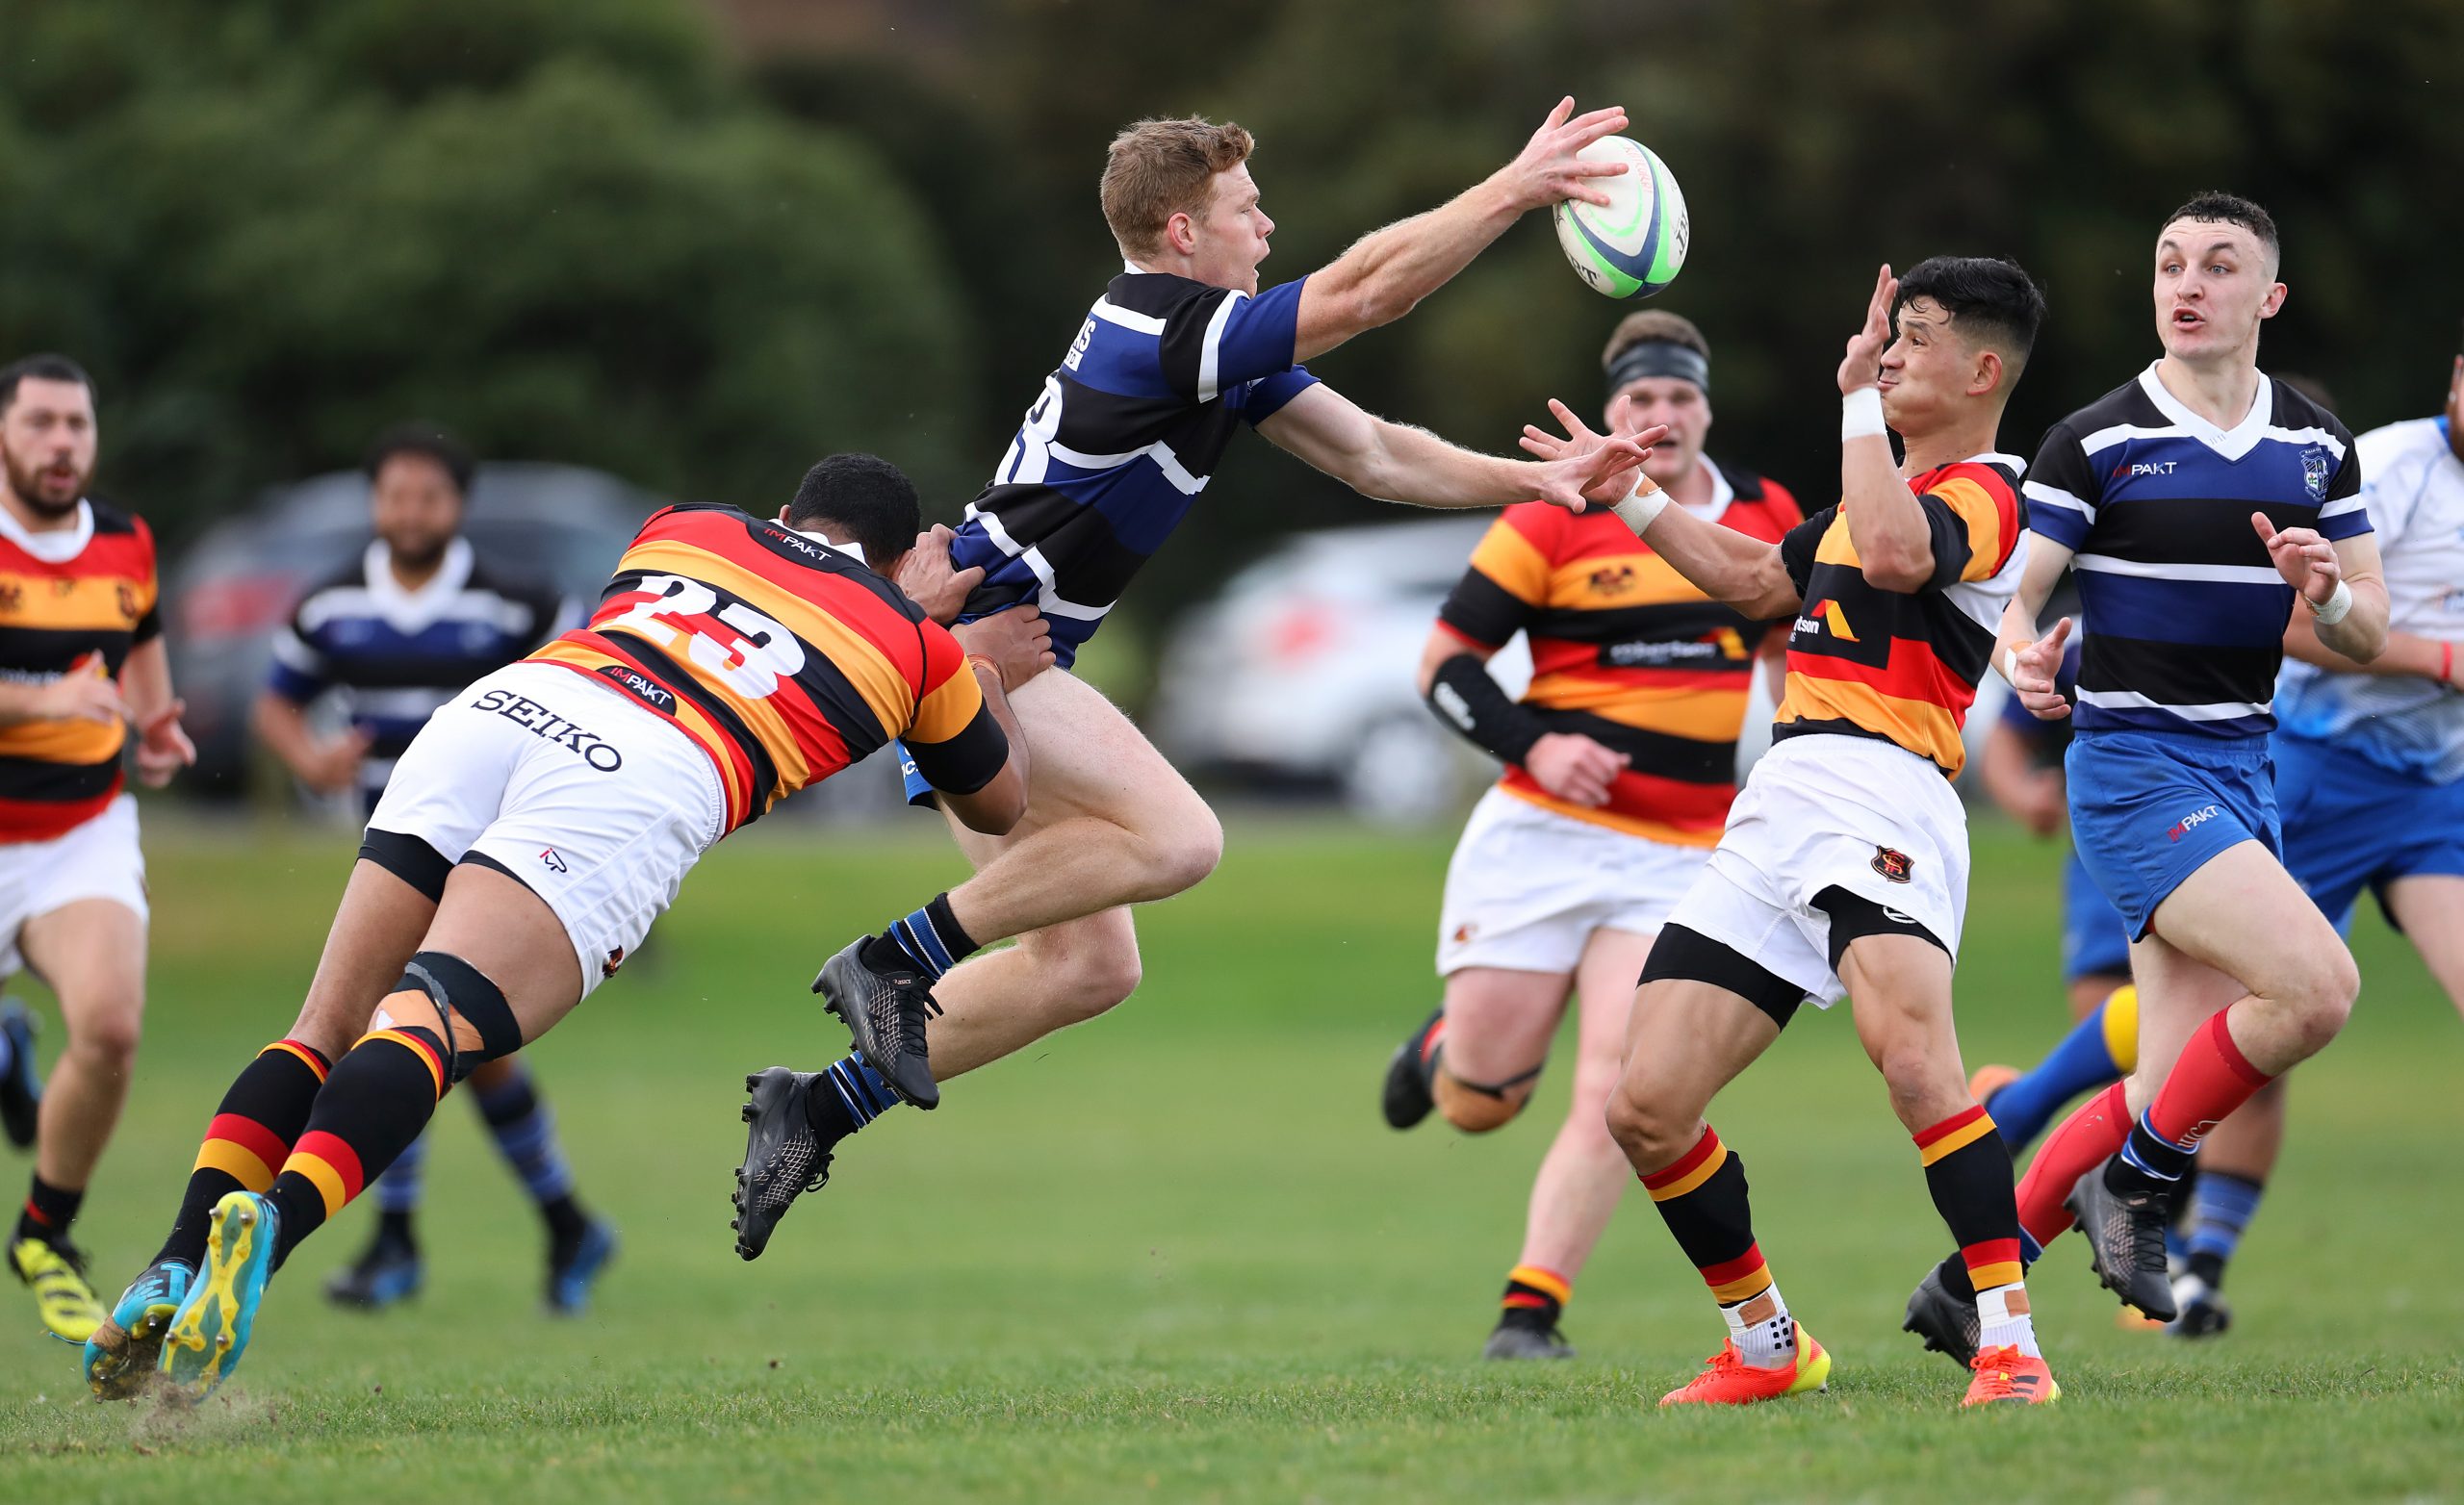 Ben Miller of Kaikorai throws a pass during the club rugby match between Kaikorai and Zingari Richmond played for the Tom Watkins Memorial Trophy at Bishopscourt in Dunedin on 7th May, 2022. © John Caswell / http://www.caswellimages.com